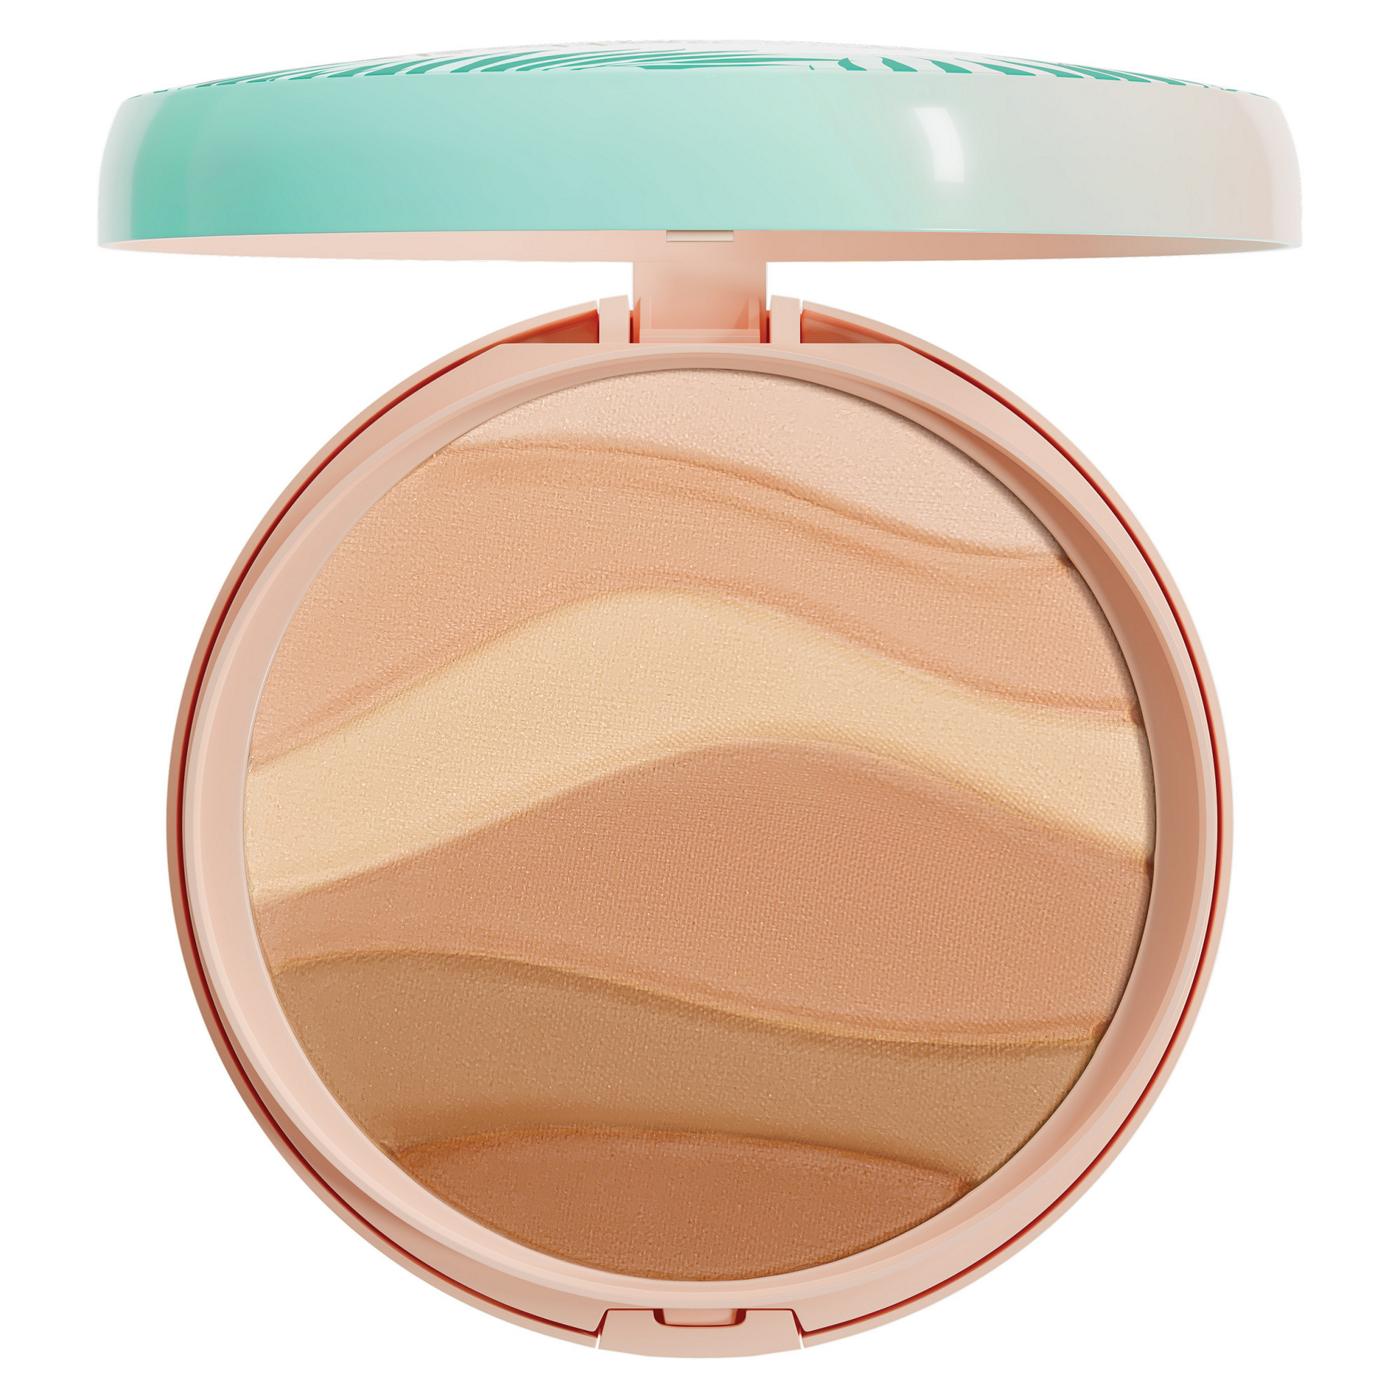 Physicians Formula Butter Believe It! Pressed Powder Creamy Natural; image 5 of 5